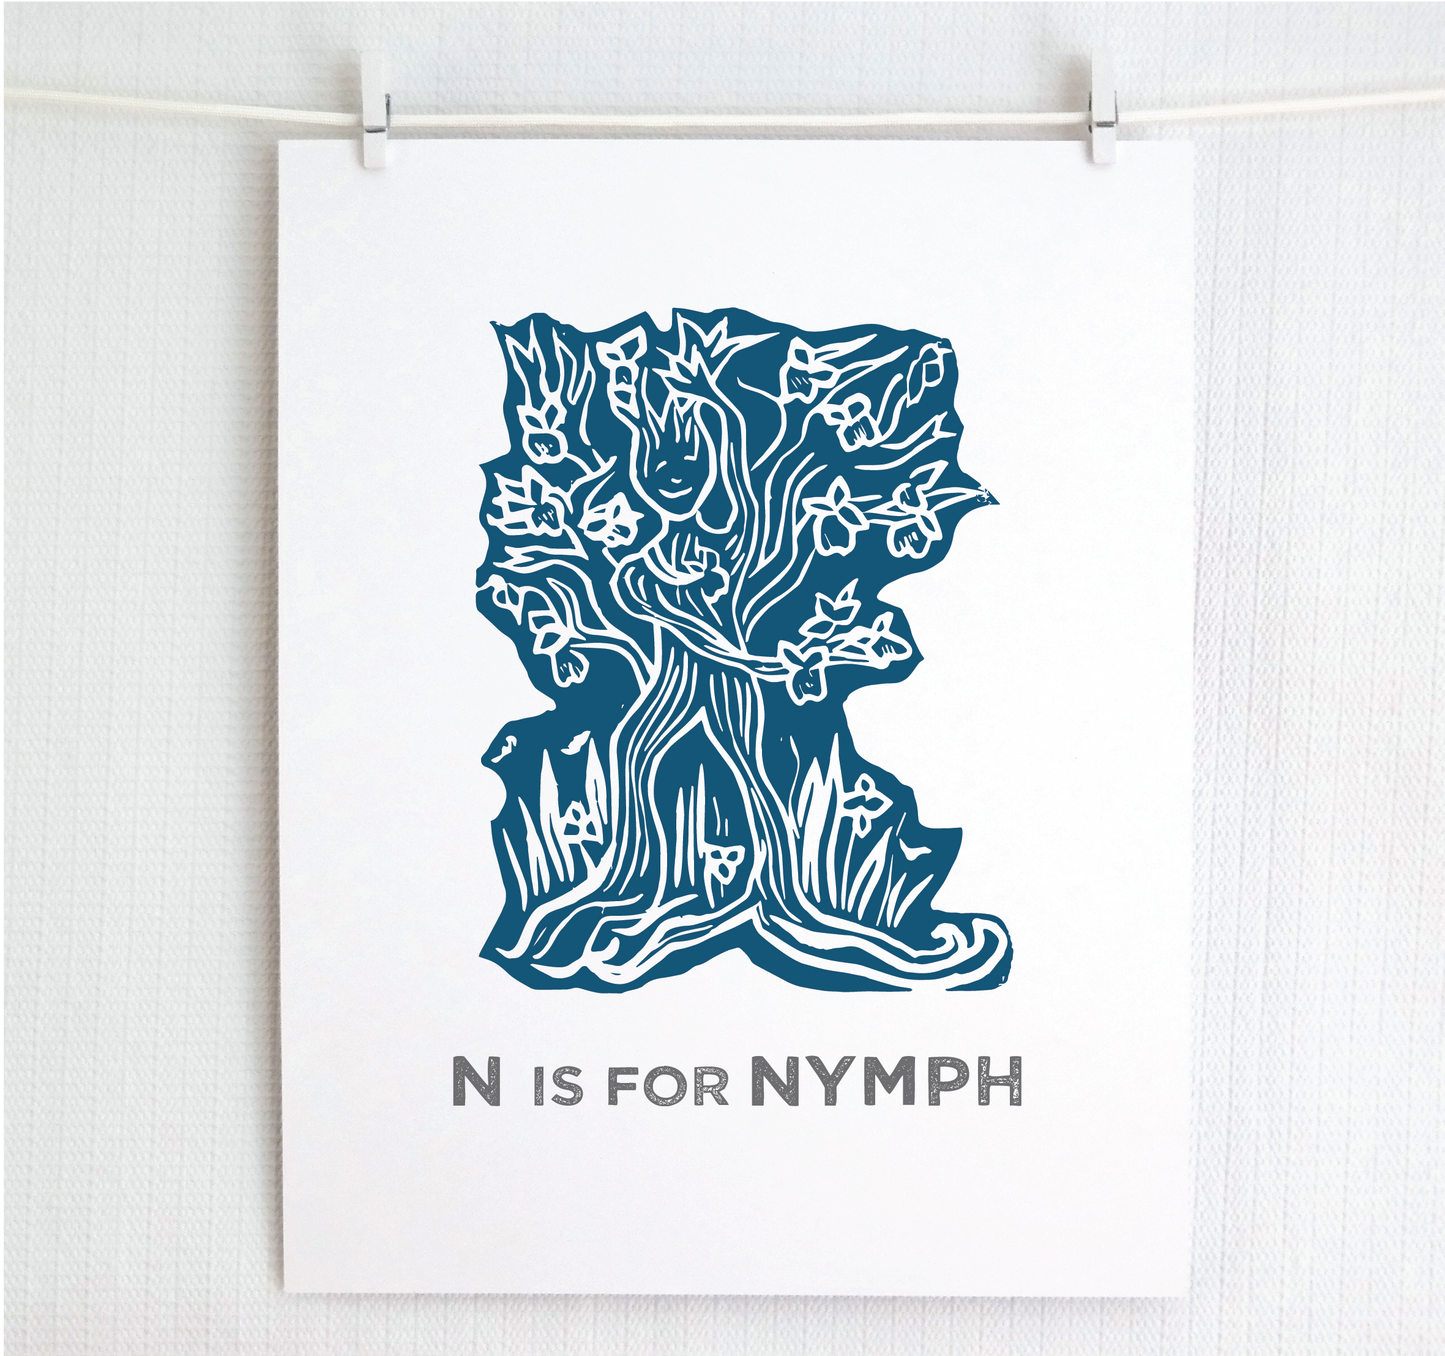 N is for Nymph